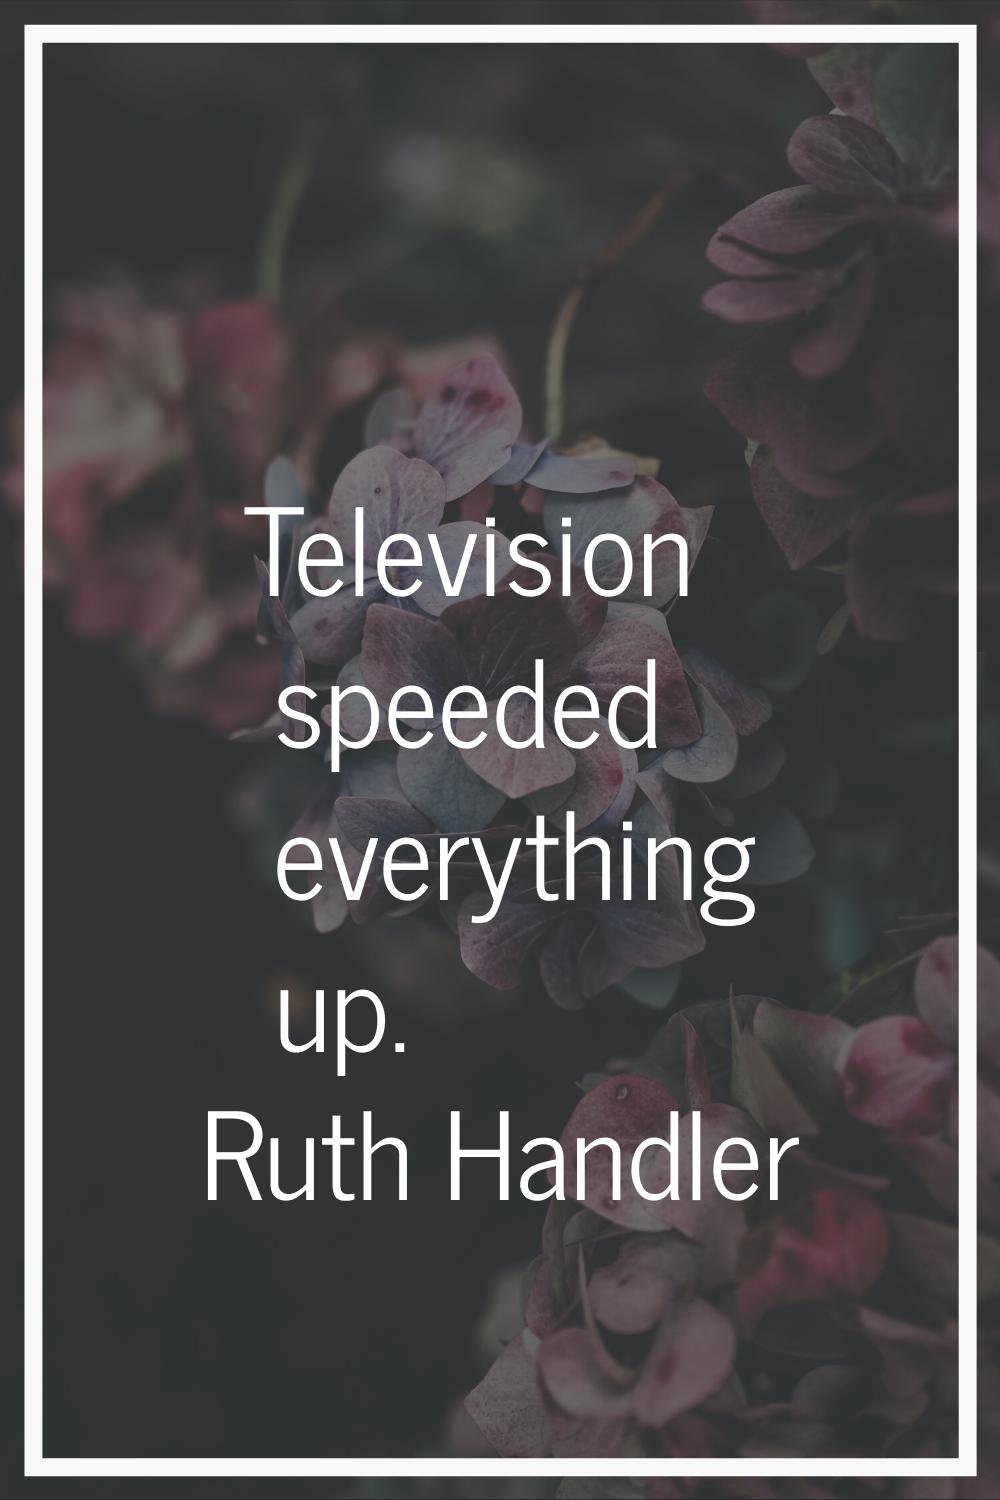 Television speeded everything up.